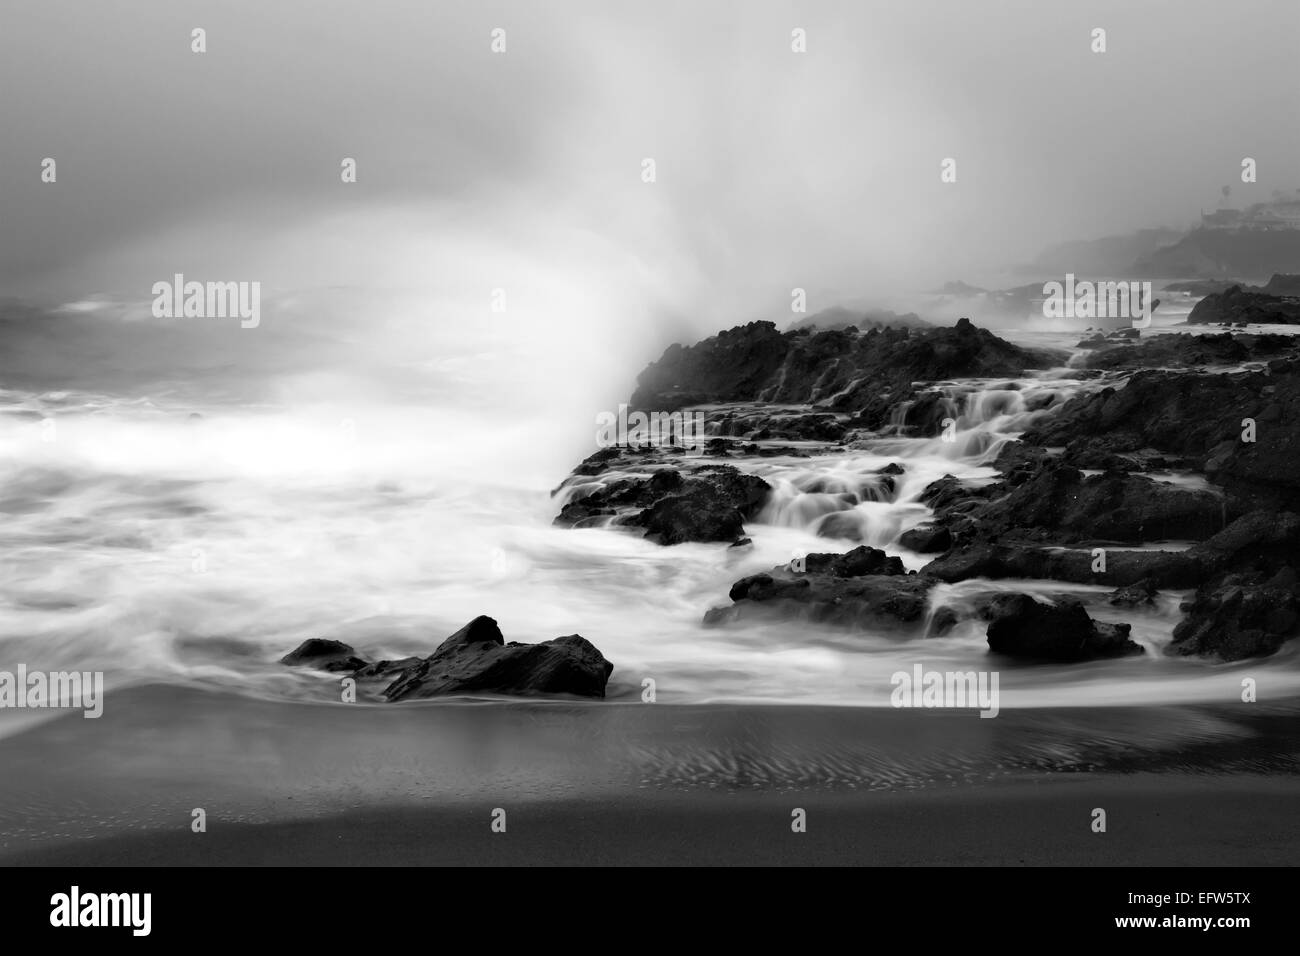 An early morning slow motion images of seawater rushing over sharp, rugged shoreline reef in Laguna Beach, California. Stock Photo